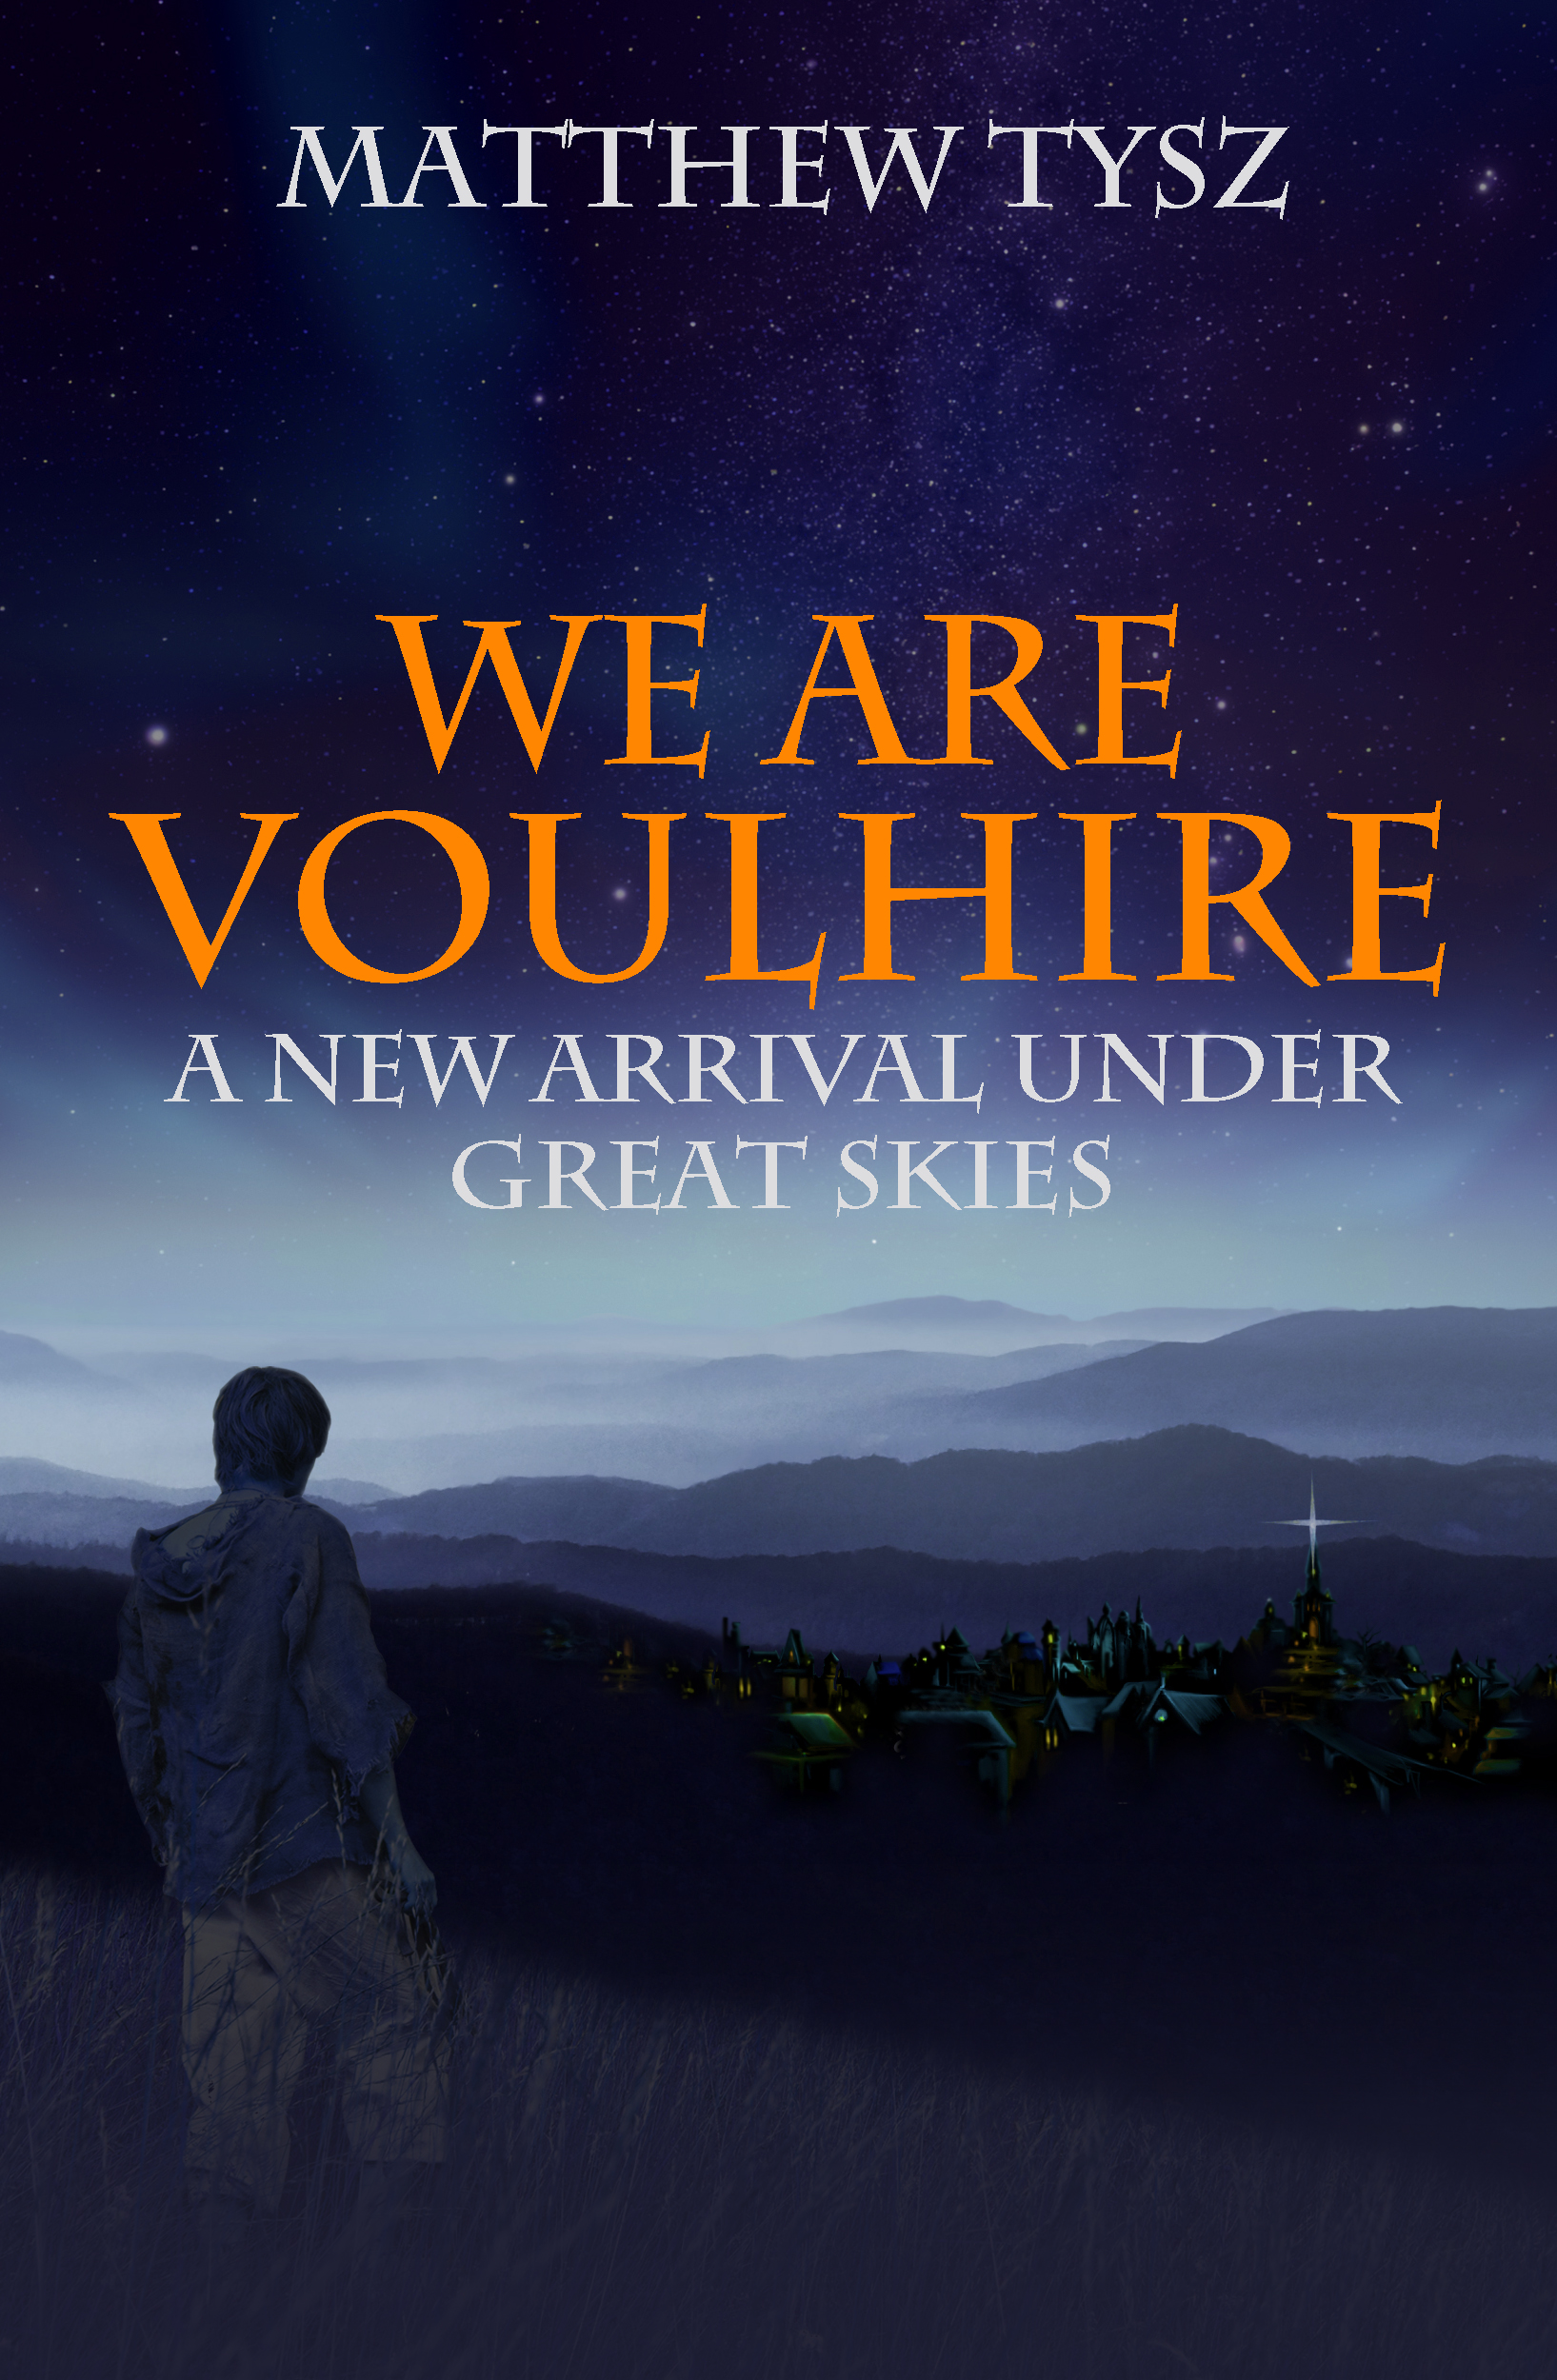 FREE: We are Voulhire: A New Arrival under Great Skies by Mathew Tysz